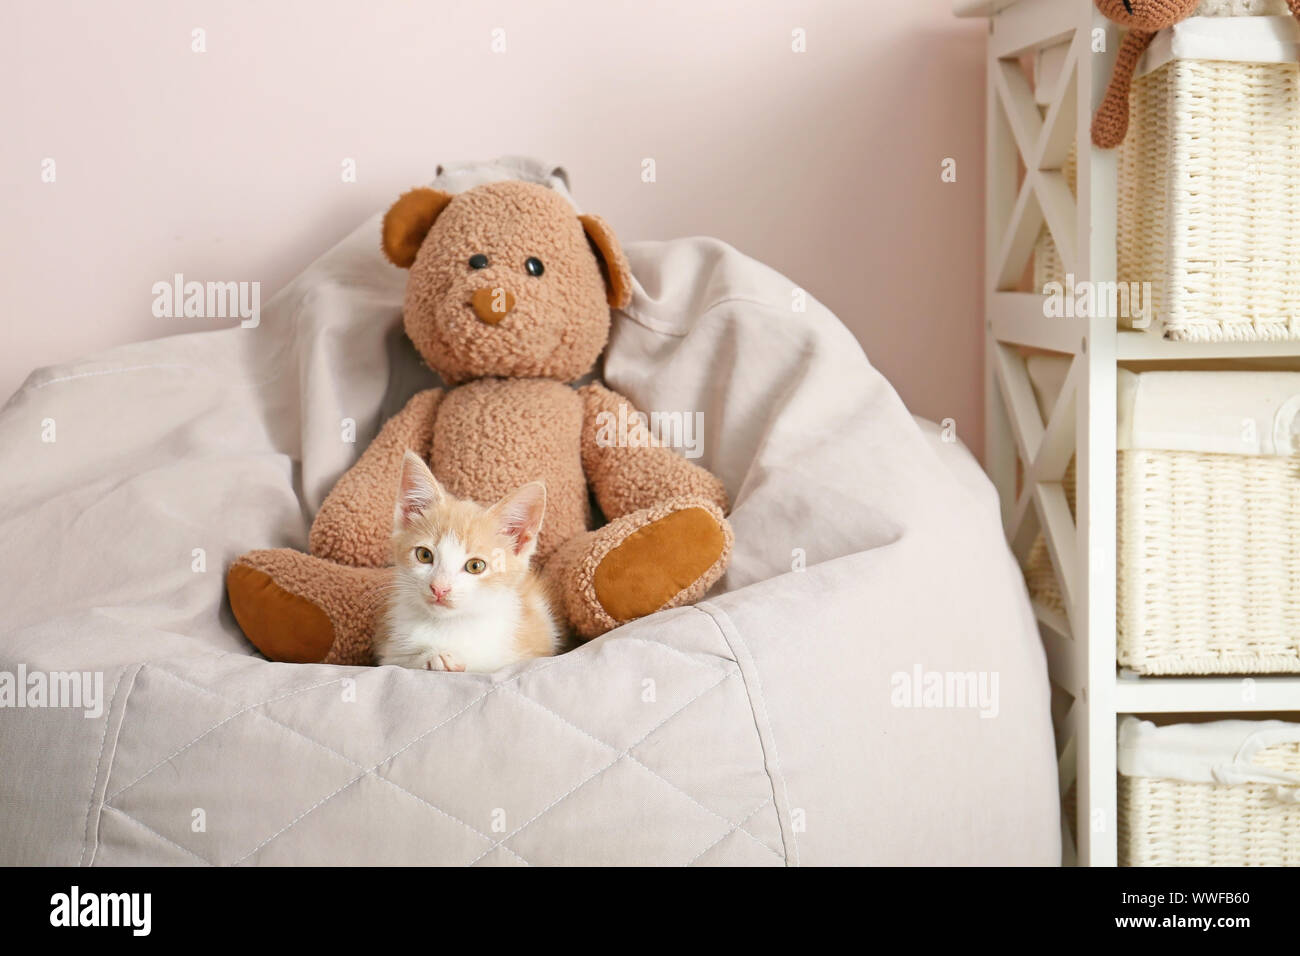 Adorable Kitten With Teddy Bear On Beanbag Chair In Room